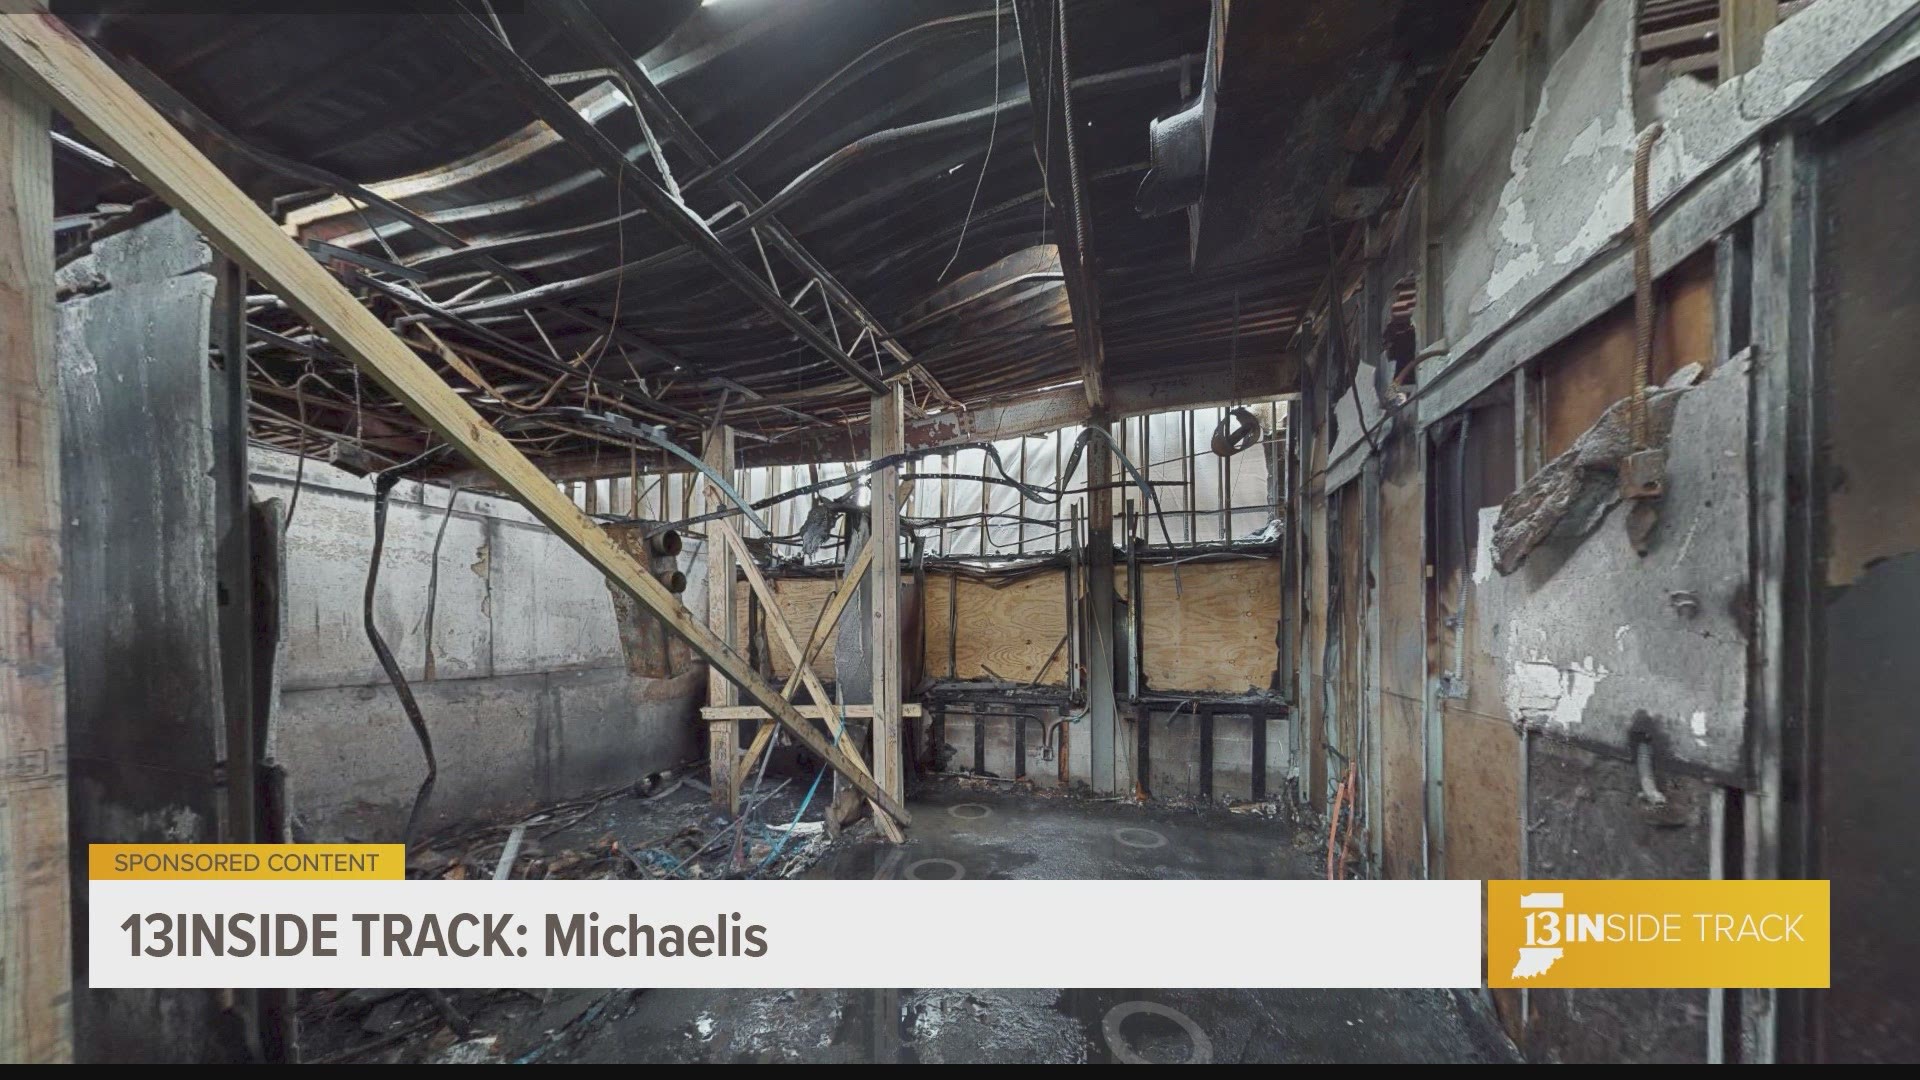 Restoration projects can be a big task by itself. To help minimize stress, the team at Michaelis offers a fast response time and also helps business and home owners